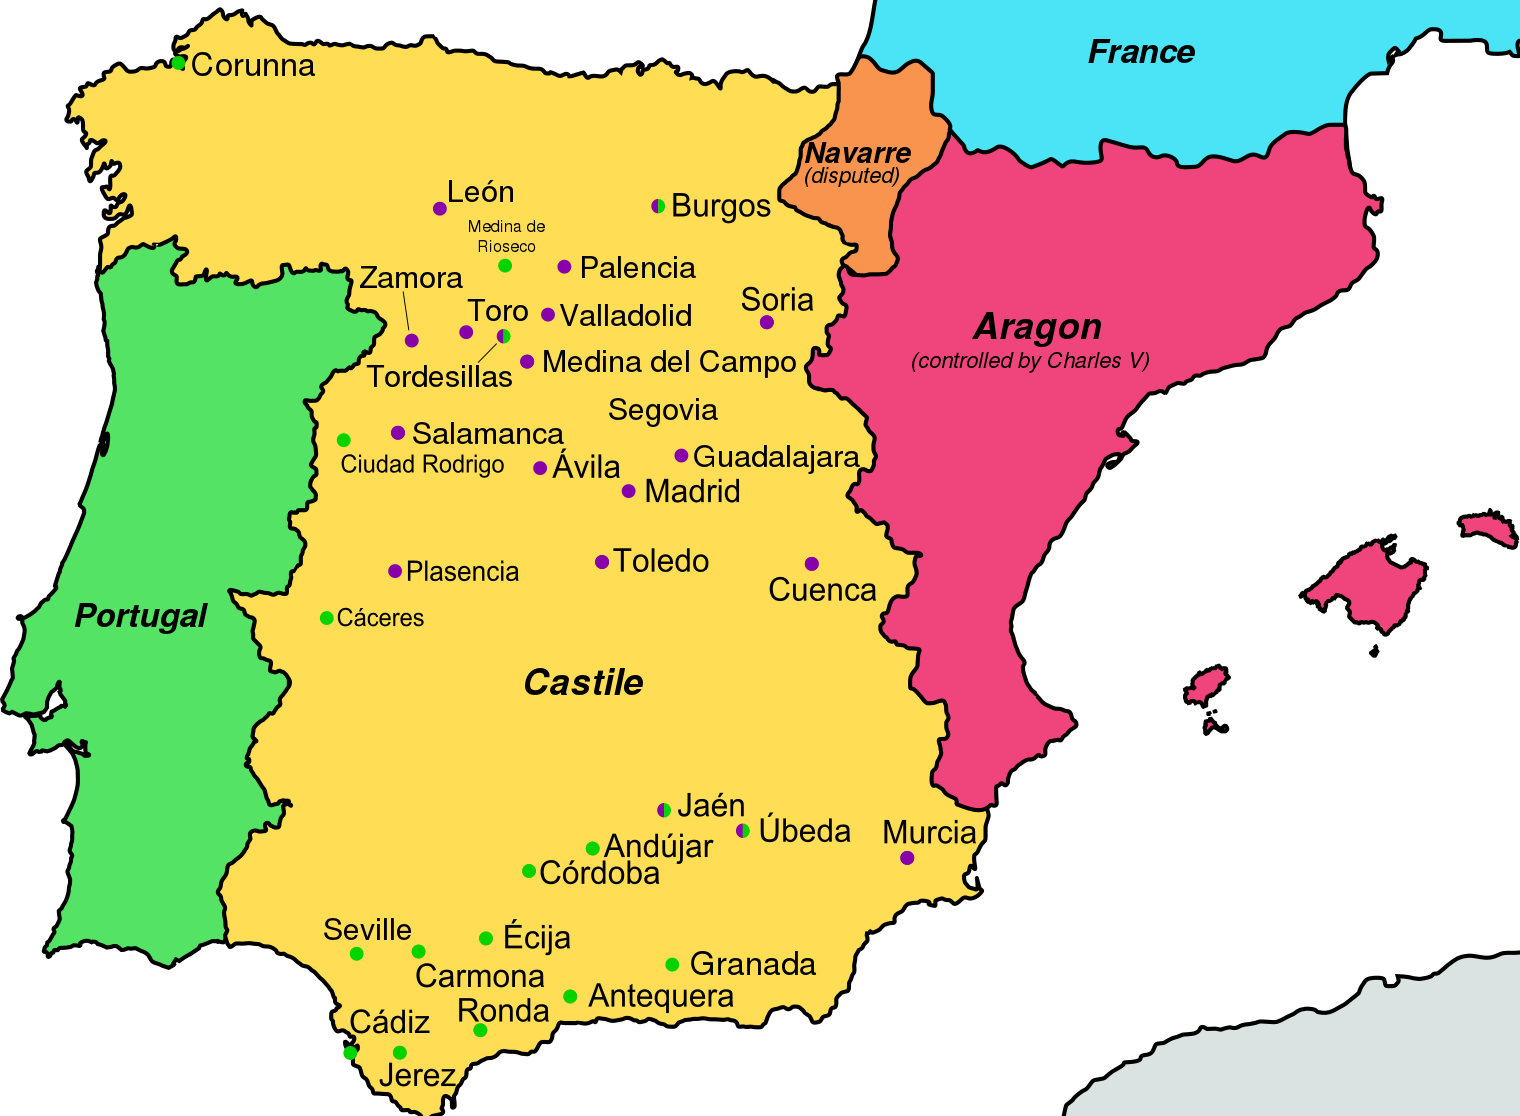 Map of Spain with cities colored by affiliation; see text for details.